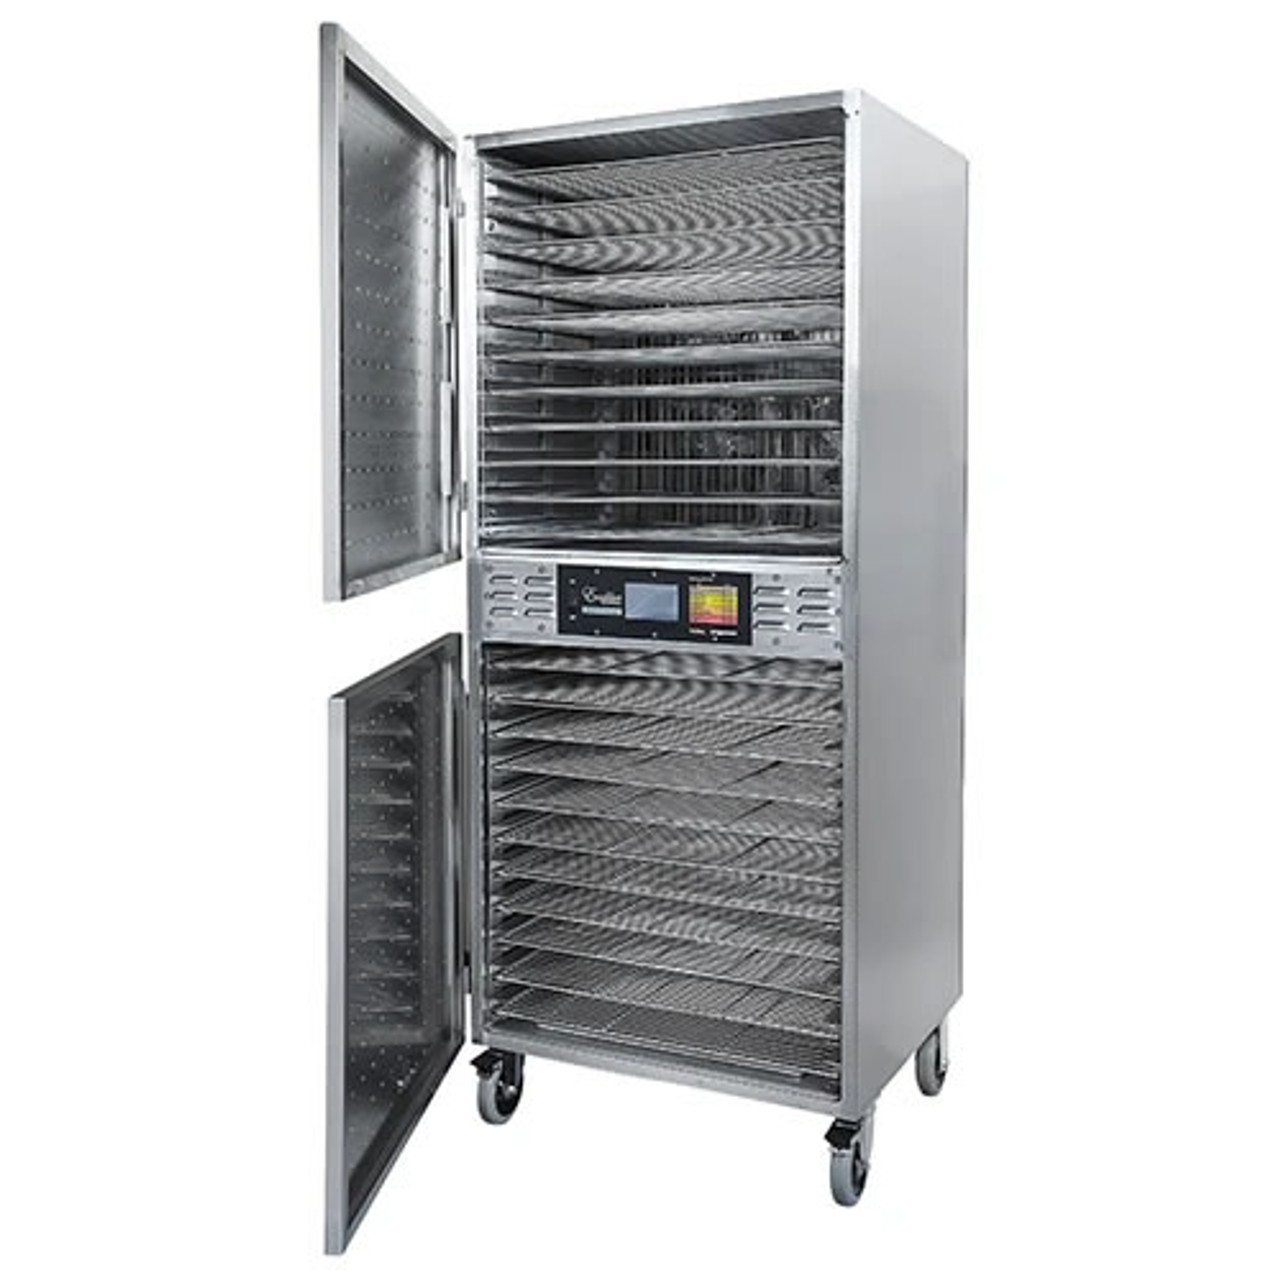 https://cdn11.bigcommerce.com/s-3n1nnt5qyw/images/stencil/1280x1280/products/9689/10855/excalibur-dual-zone-commercial-dehydrator-stainless-steel-nsf-model-comm2-2__94539.1629750702.jpg?c=1?imbypass=on